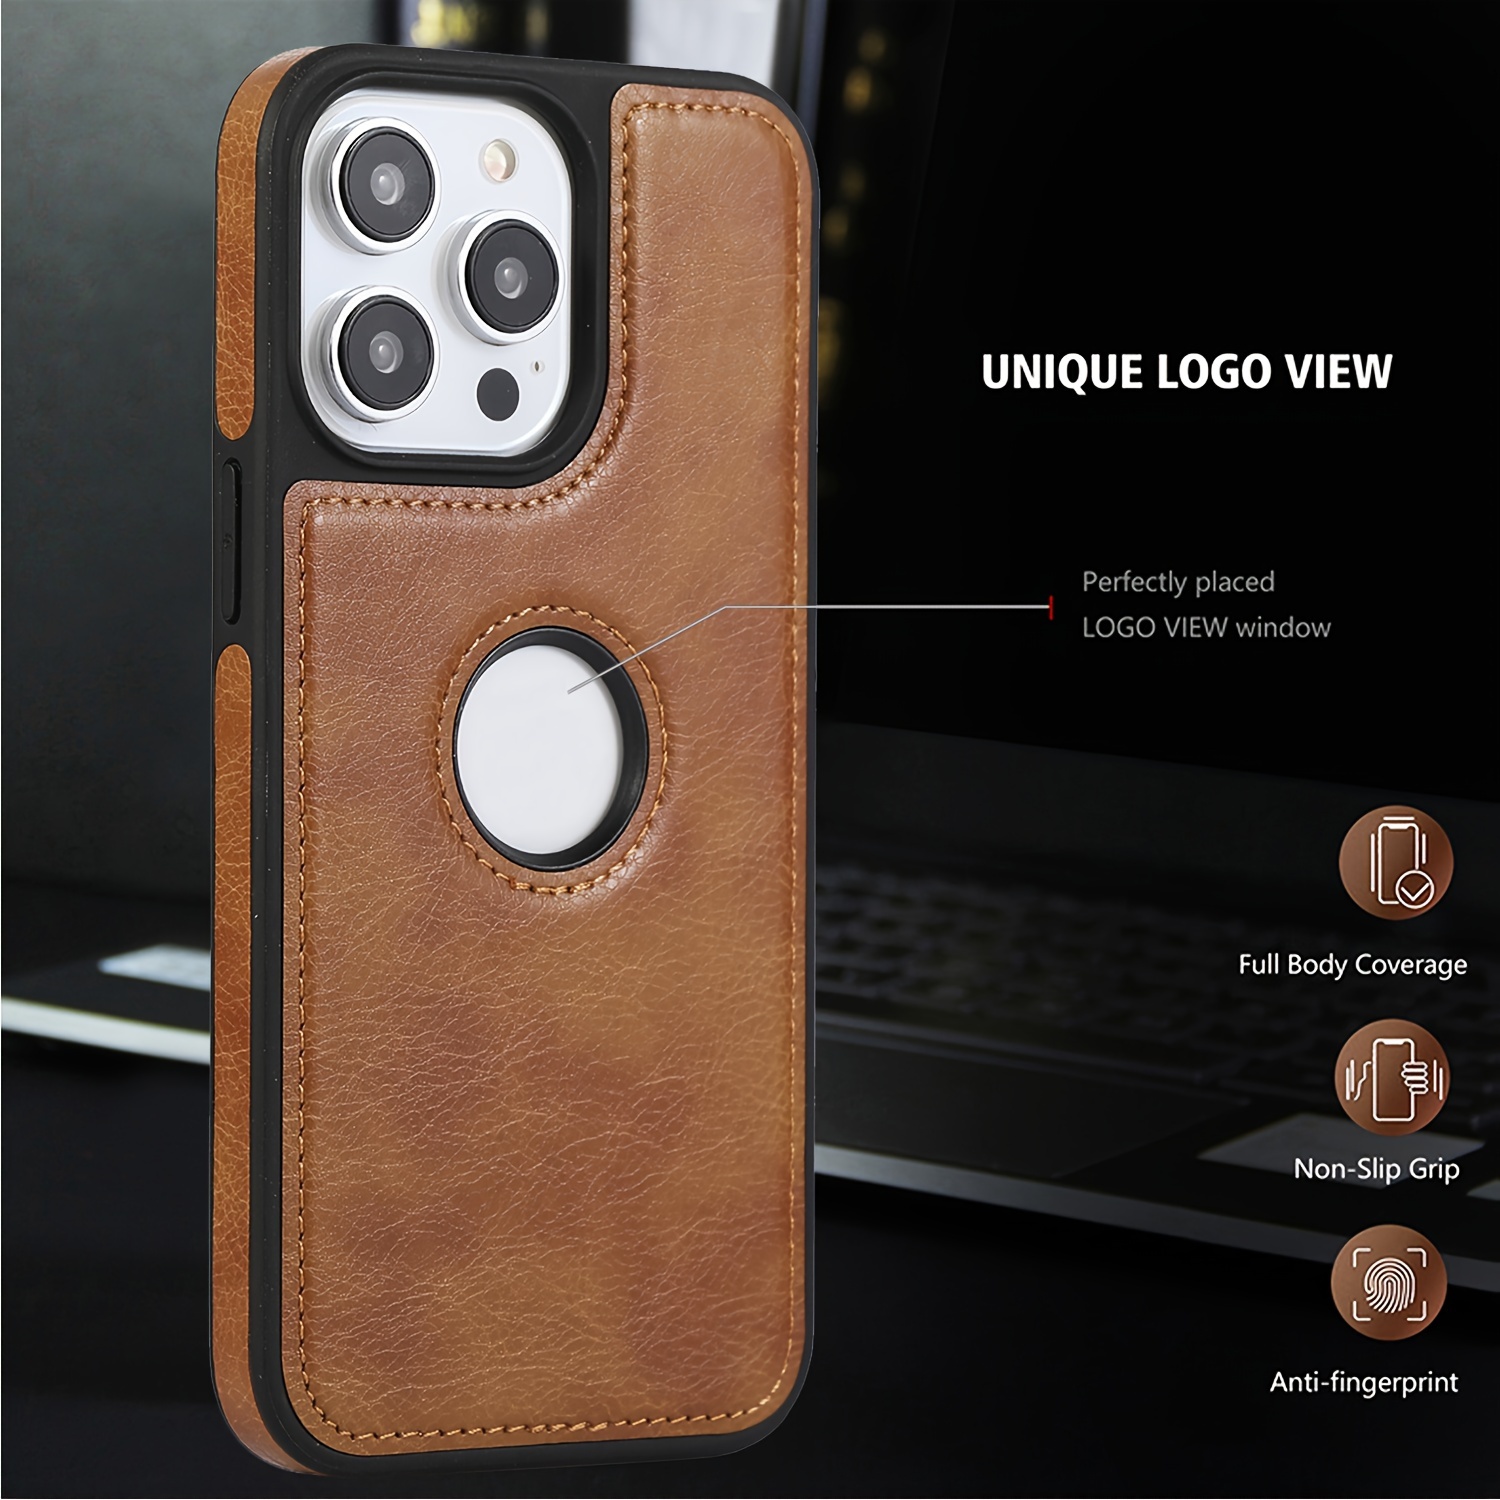  Square Designer Luxury Case for iPhone 13 pro max Leather with  Wristband Strap Hand Holder Ring Kickstand Silicone Shockproof Protective  Bumper Trunk Box for Women Girls (Brown, iphone 13 Pro Max) 